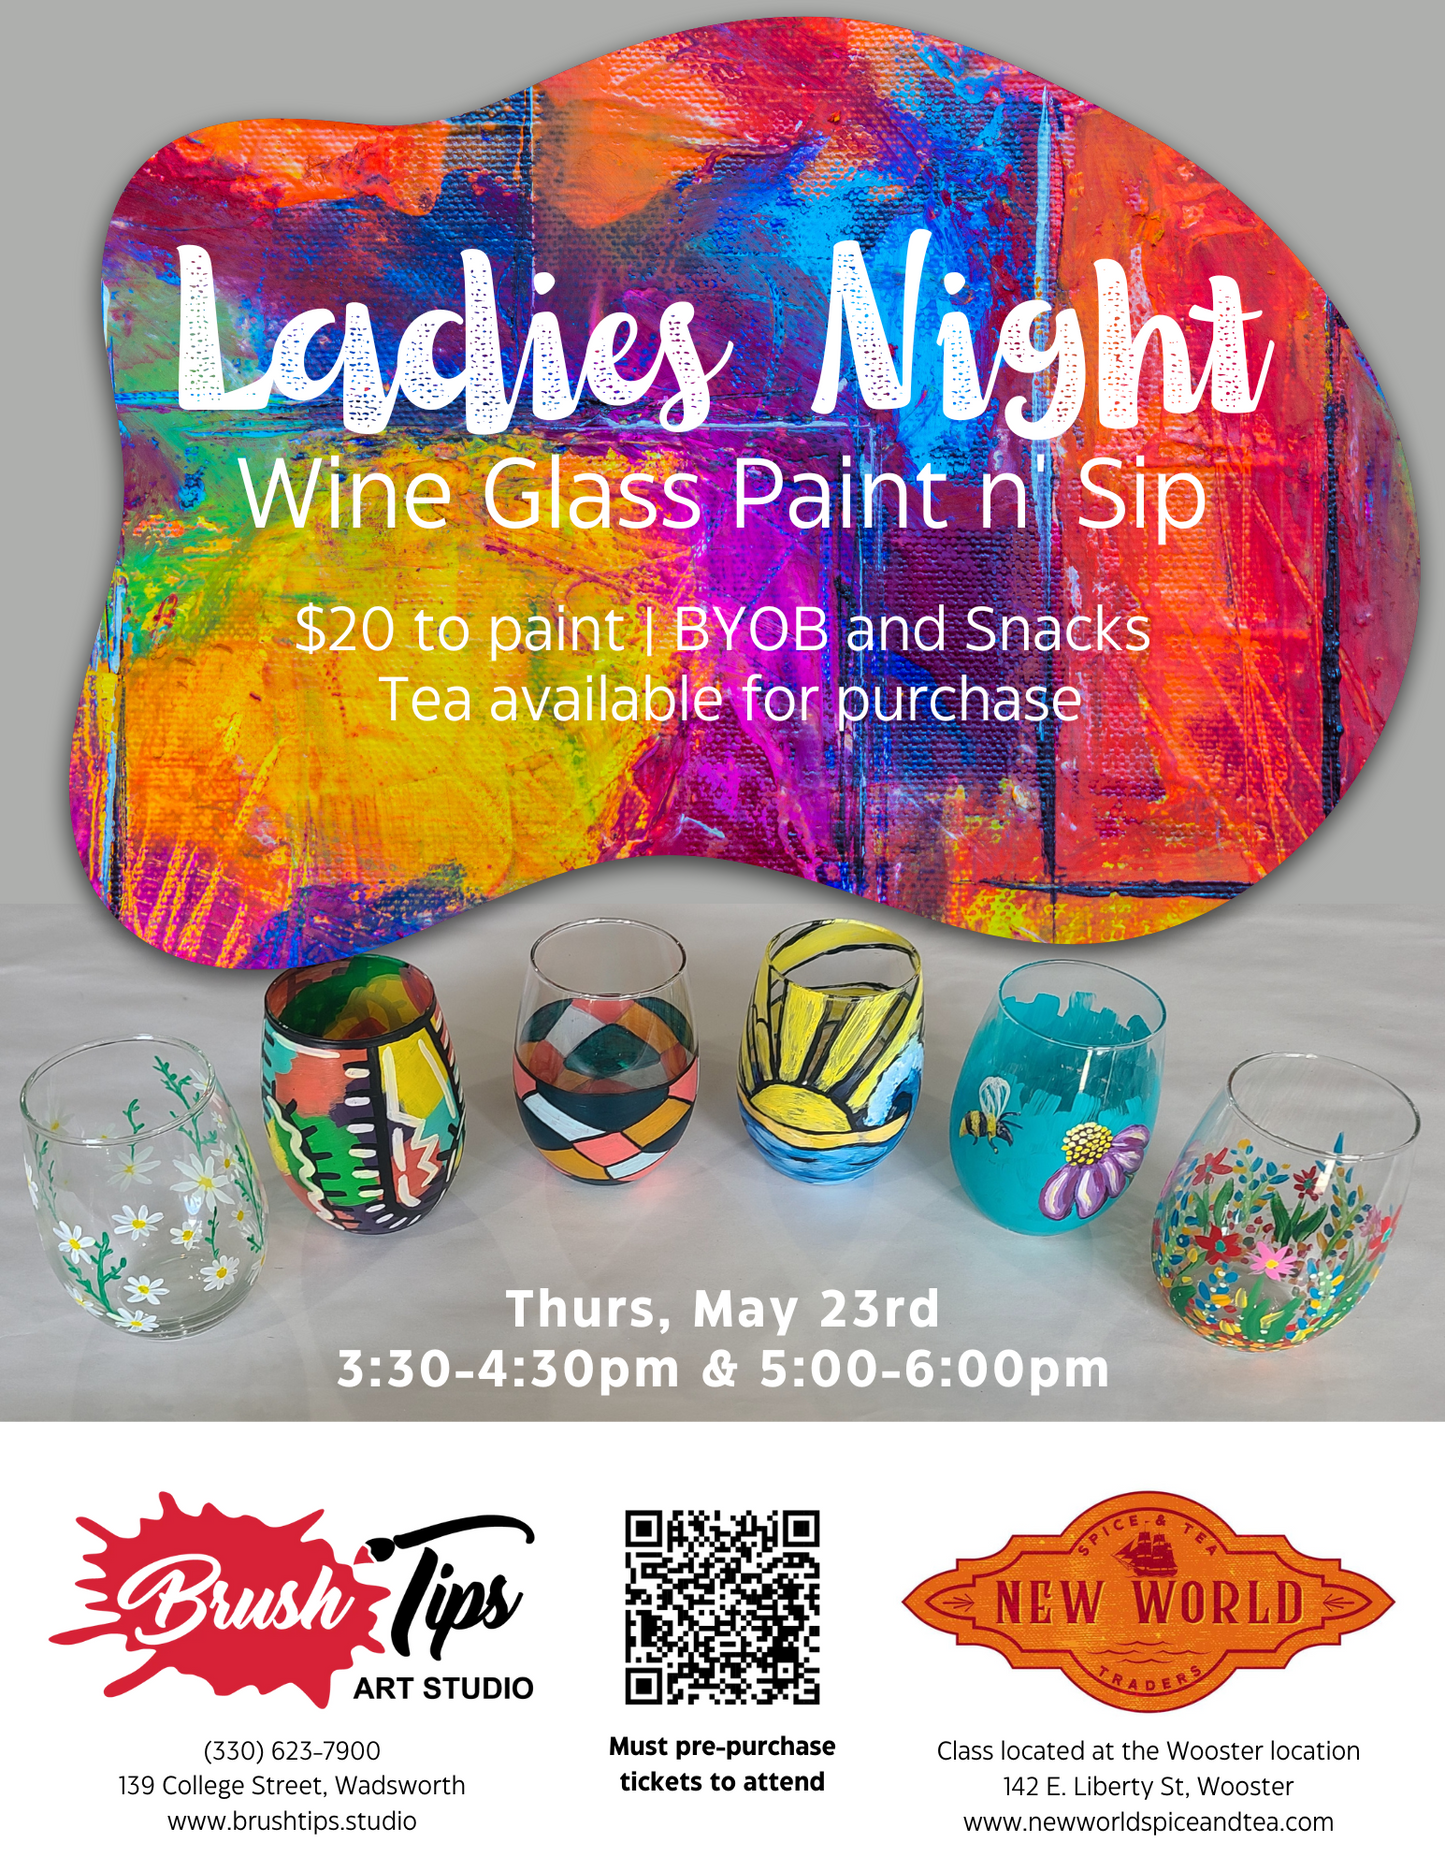 Ladies Night Wooster - Wine Glass Painting AT NEW WORLD IN WOOSTER